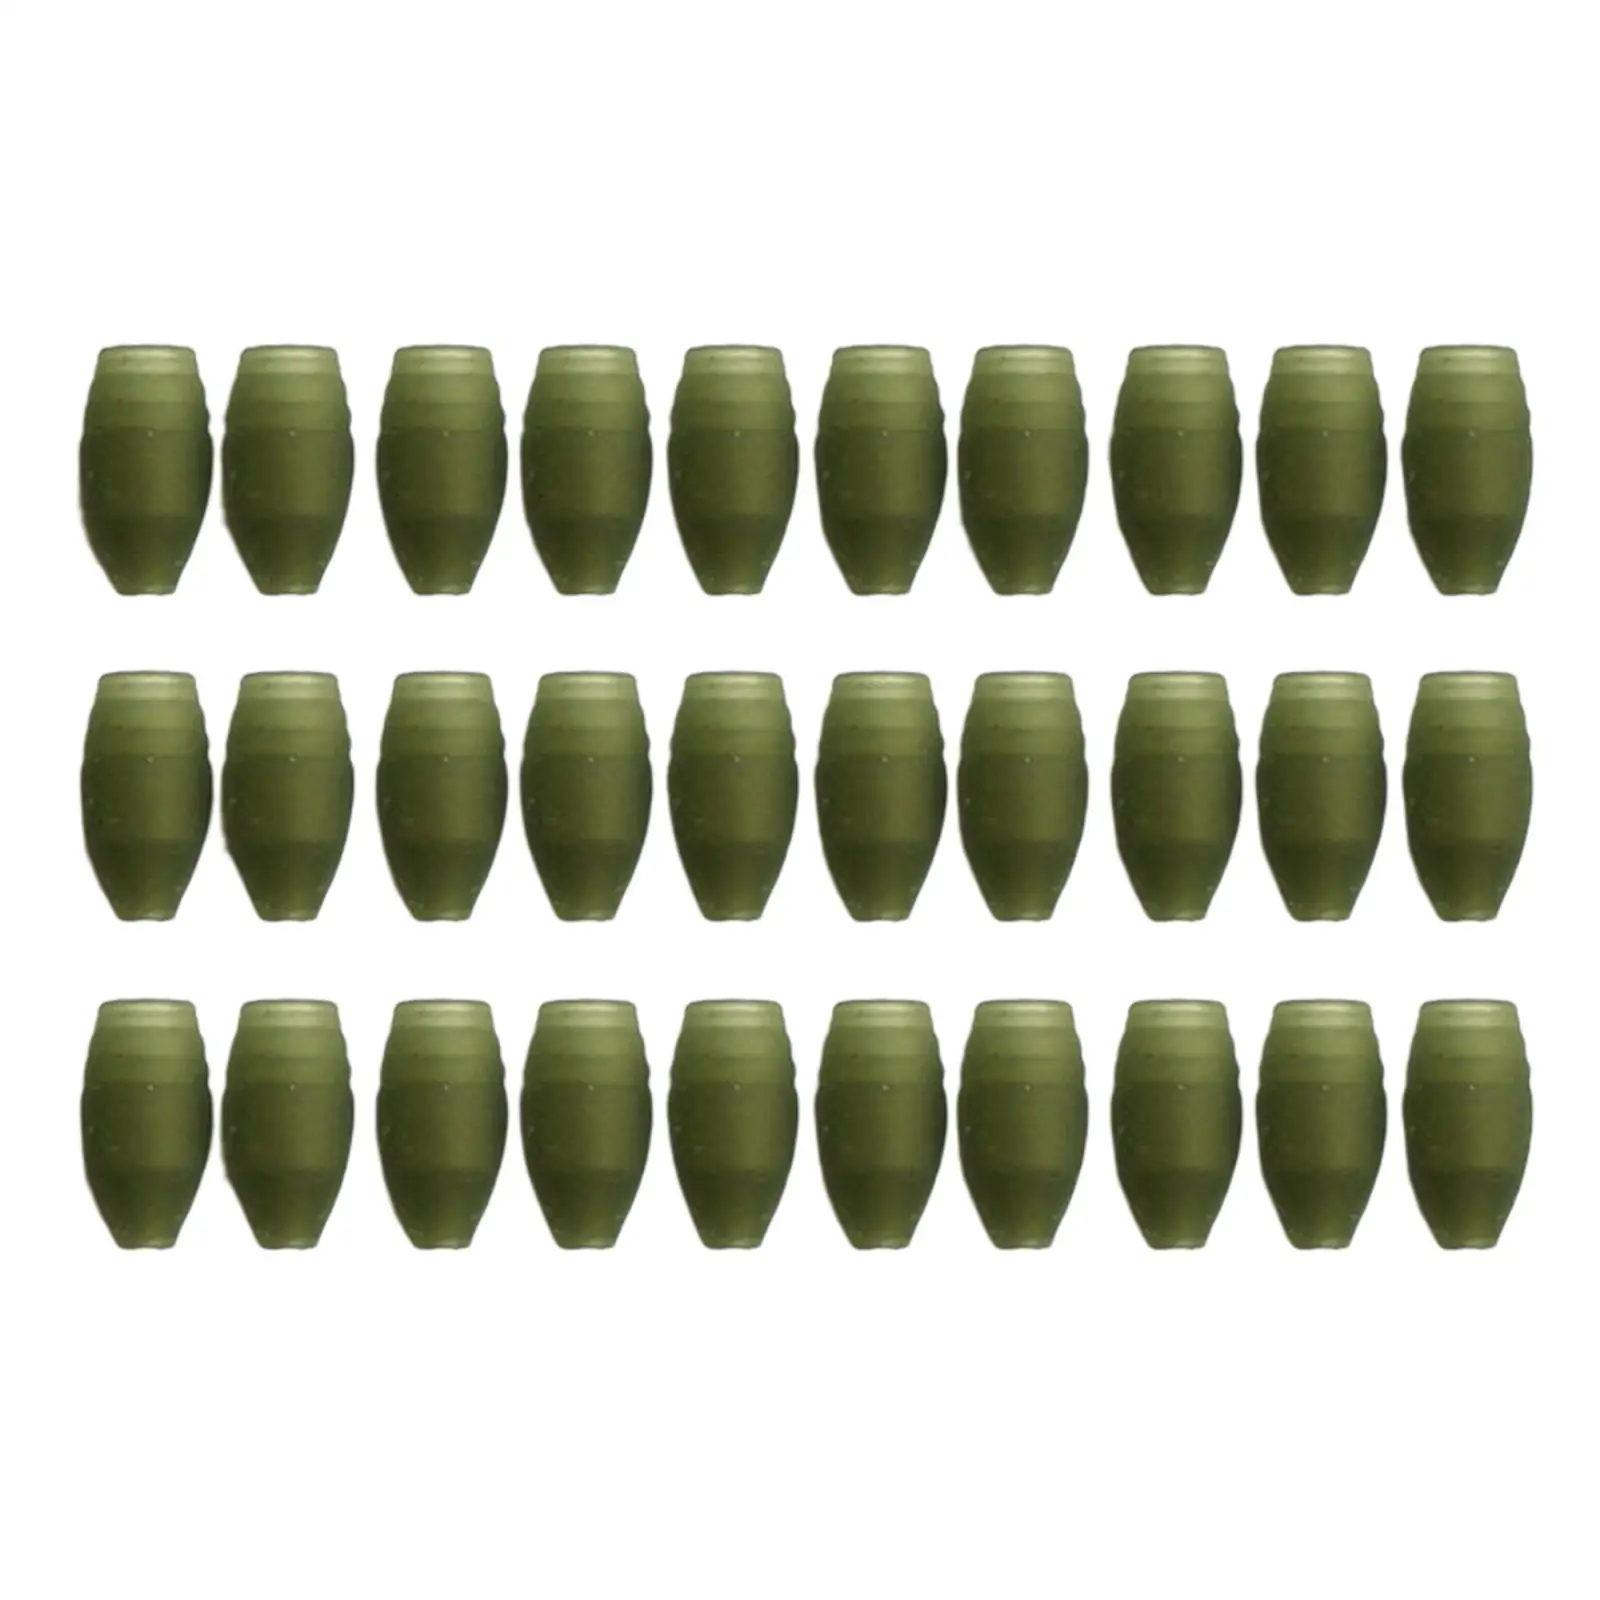 30 Pieces Match Elastic Dacron Connectors Carp Plastic Green Accessories Tool for Pole Tip Fishing Tackle Rigs Solid and Hollow